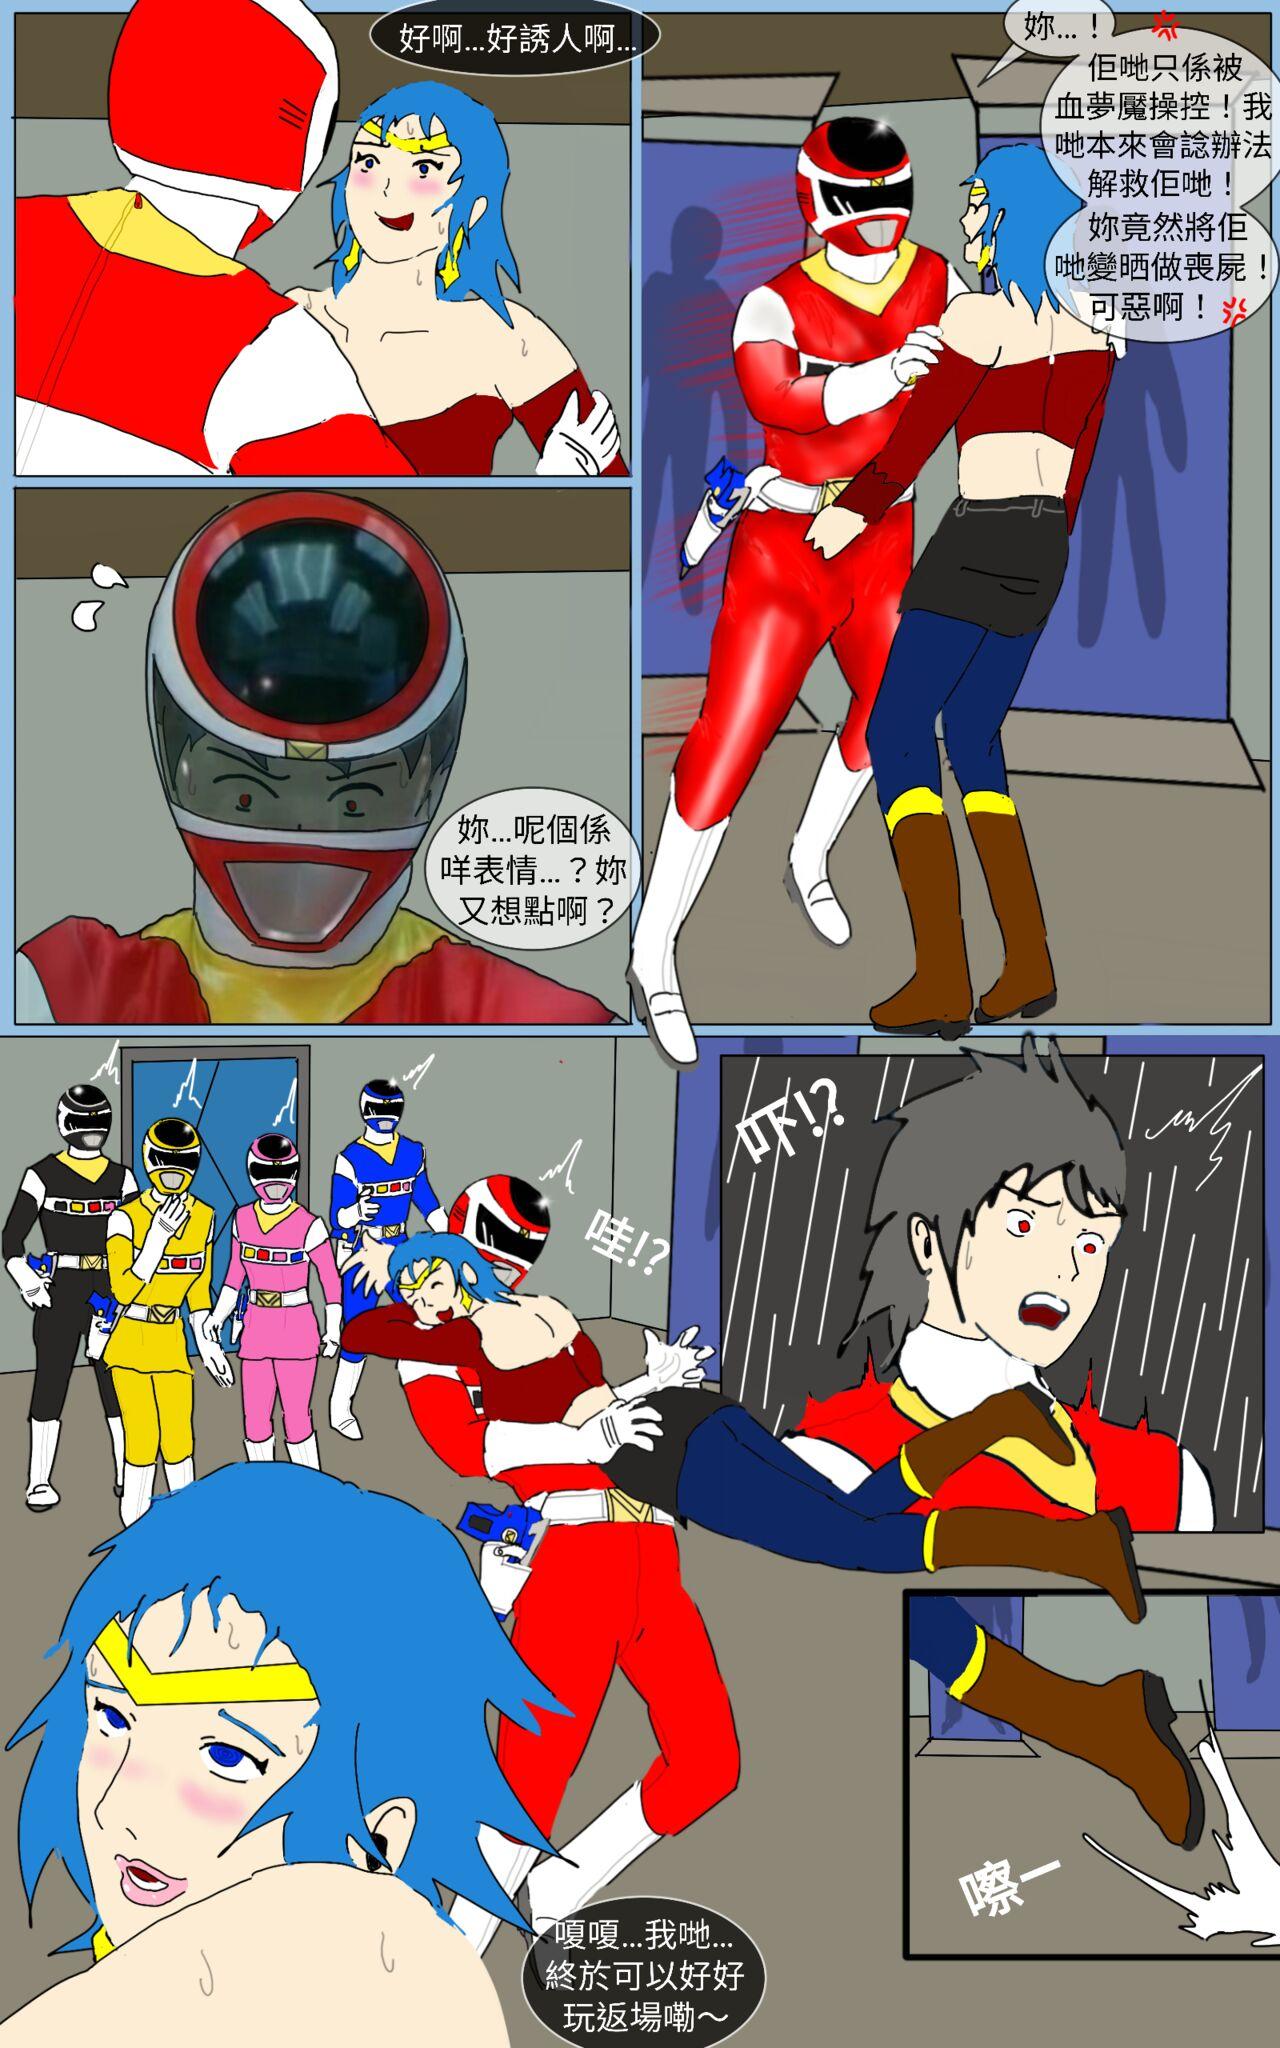 Family Roleplay Mission 32 - Super sentai Mojada - Page 5